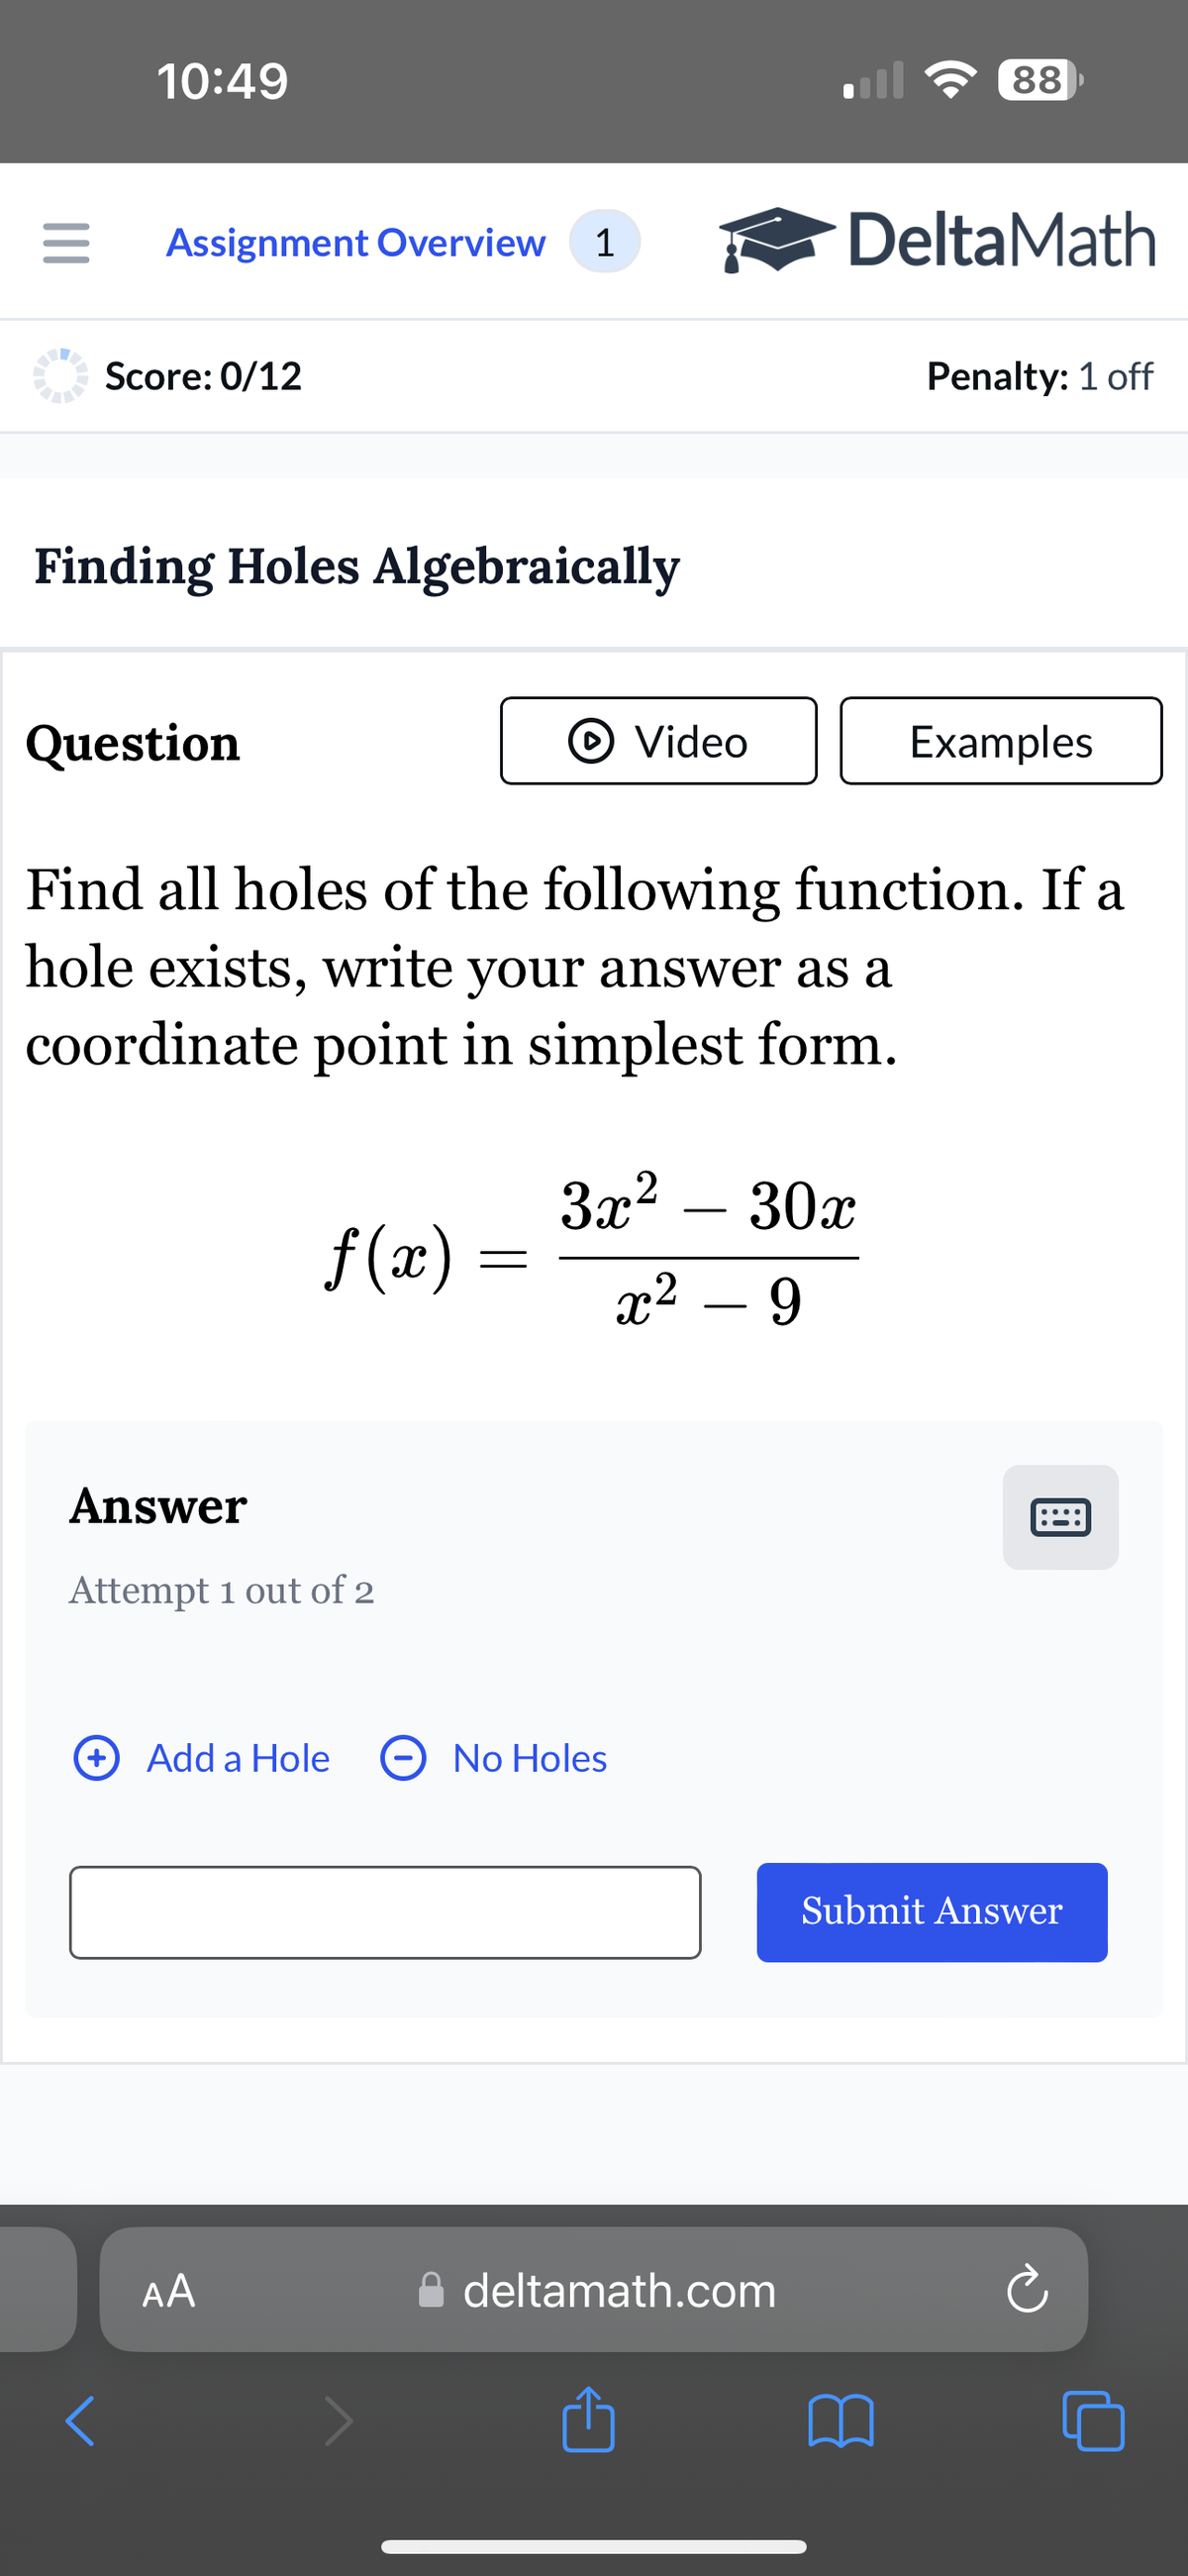 10:49
88
Assignment Overview
1
DeltaMath
Score: 0/12
Penalty: 1 off
Finding Holes Algebraically
Question
Video
Examples
Find all holes of the following function. If a
hole exists, write your answer as a
coordinate point in simplest form.
3x² - 30x
f(x) =
-
x² - 9
Answer
Attempt 1 out of 2
+ Add a Hole
No Holes
AA
⚫ deltamath.com
1
Submit Answer